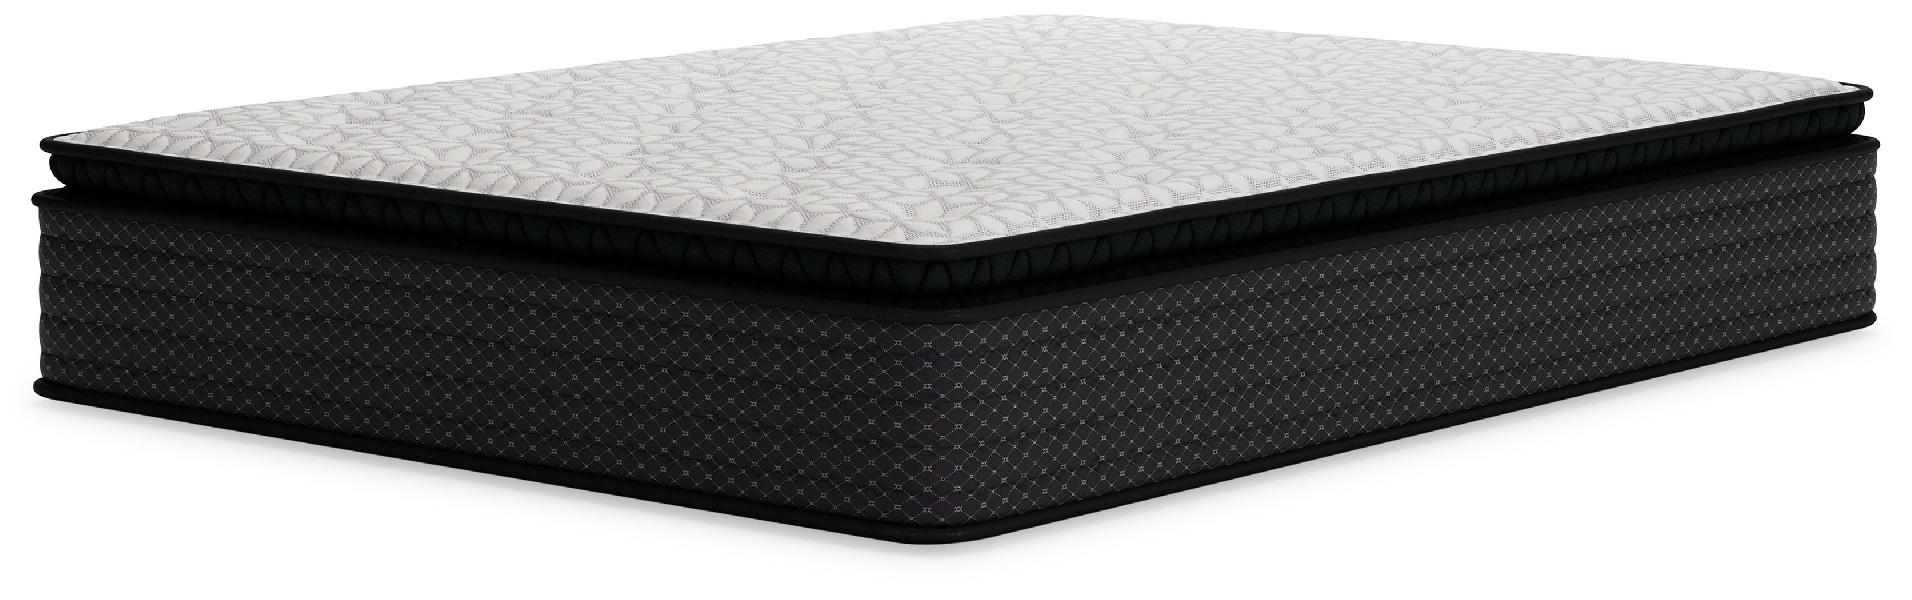 Image of Limited Edition Pt - White - Full Mattress